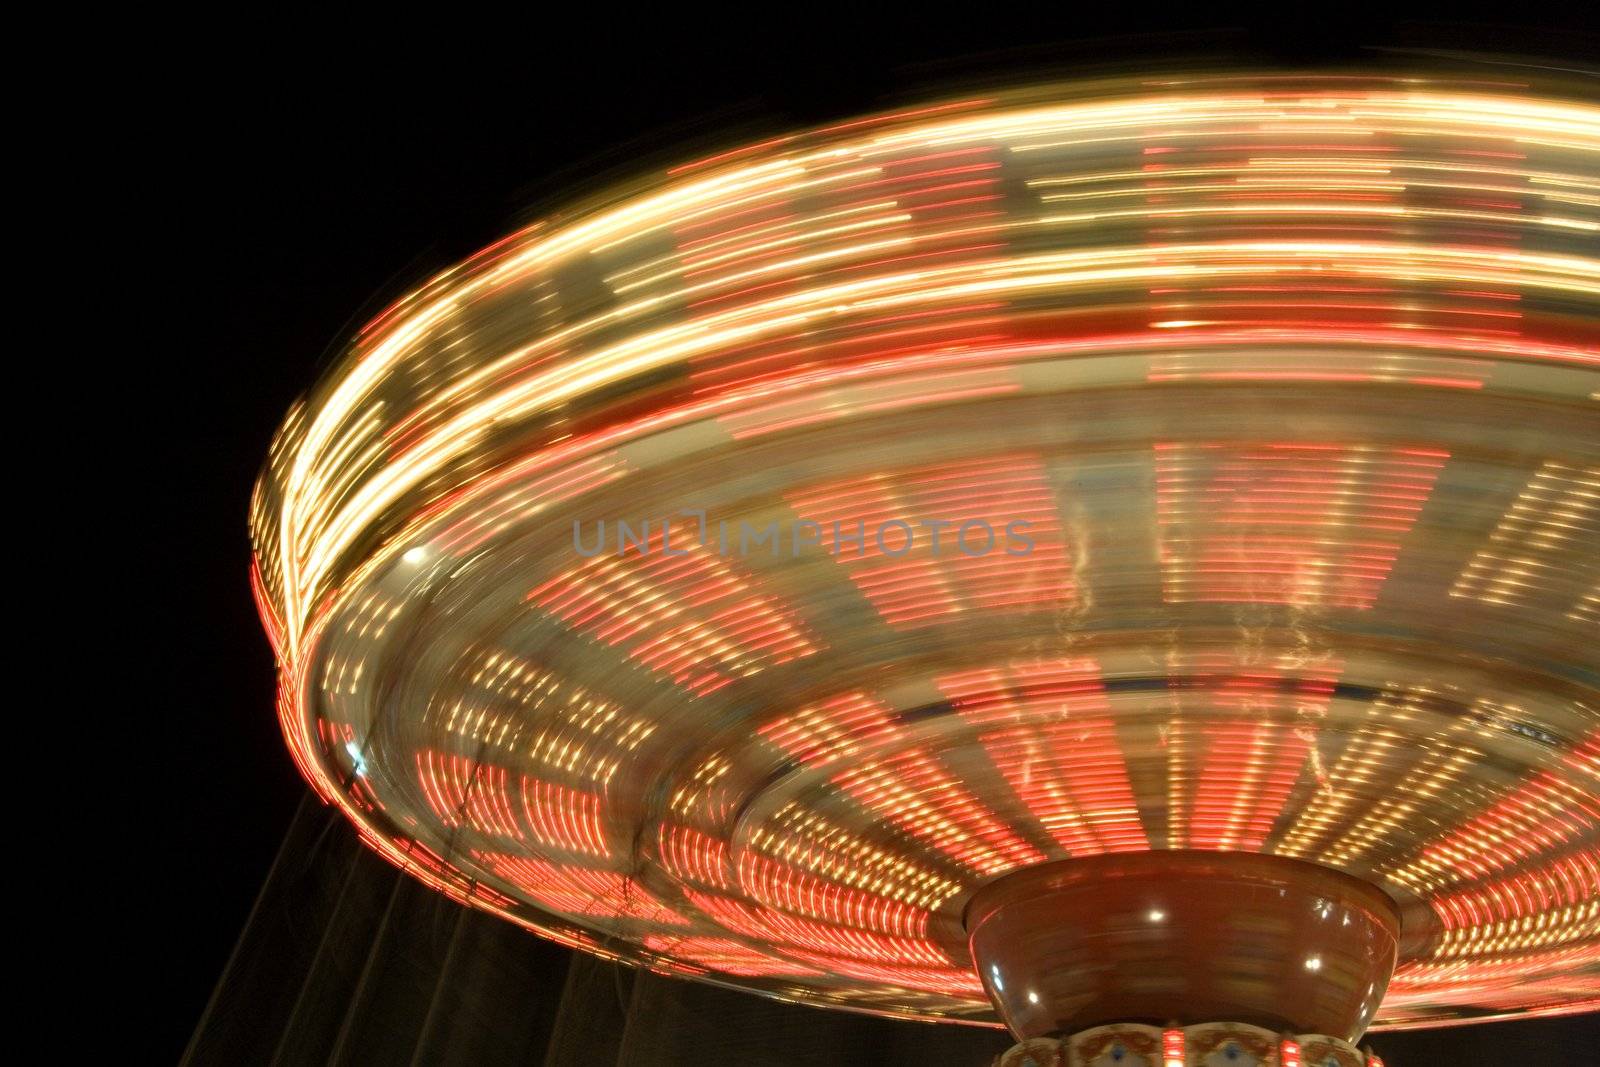 Image of a merry-go-round at night in Kuala Lumpur, Malaysia. Image shot at slow speed to capture motion blur.